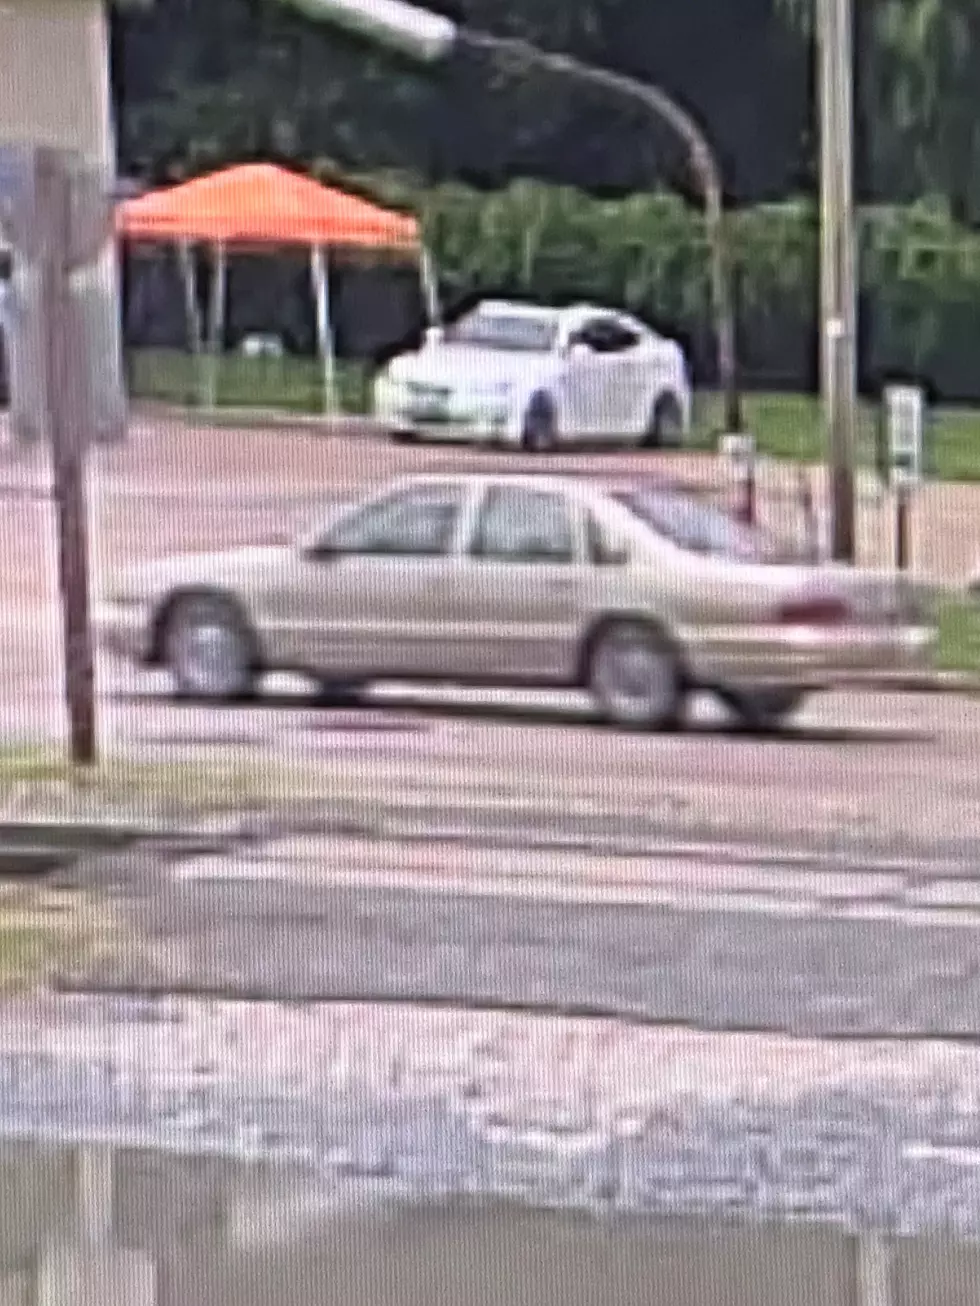 Shreveport Police Searching for Driver of Car Used in Shooting